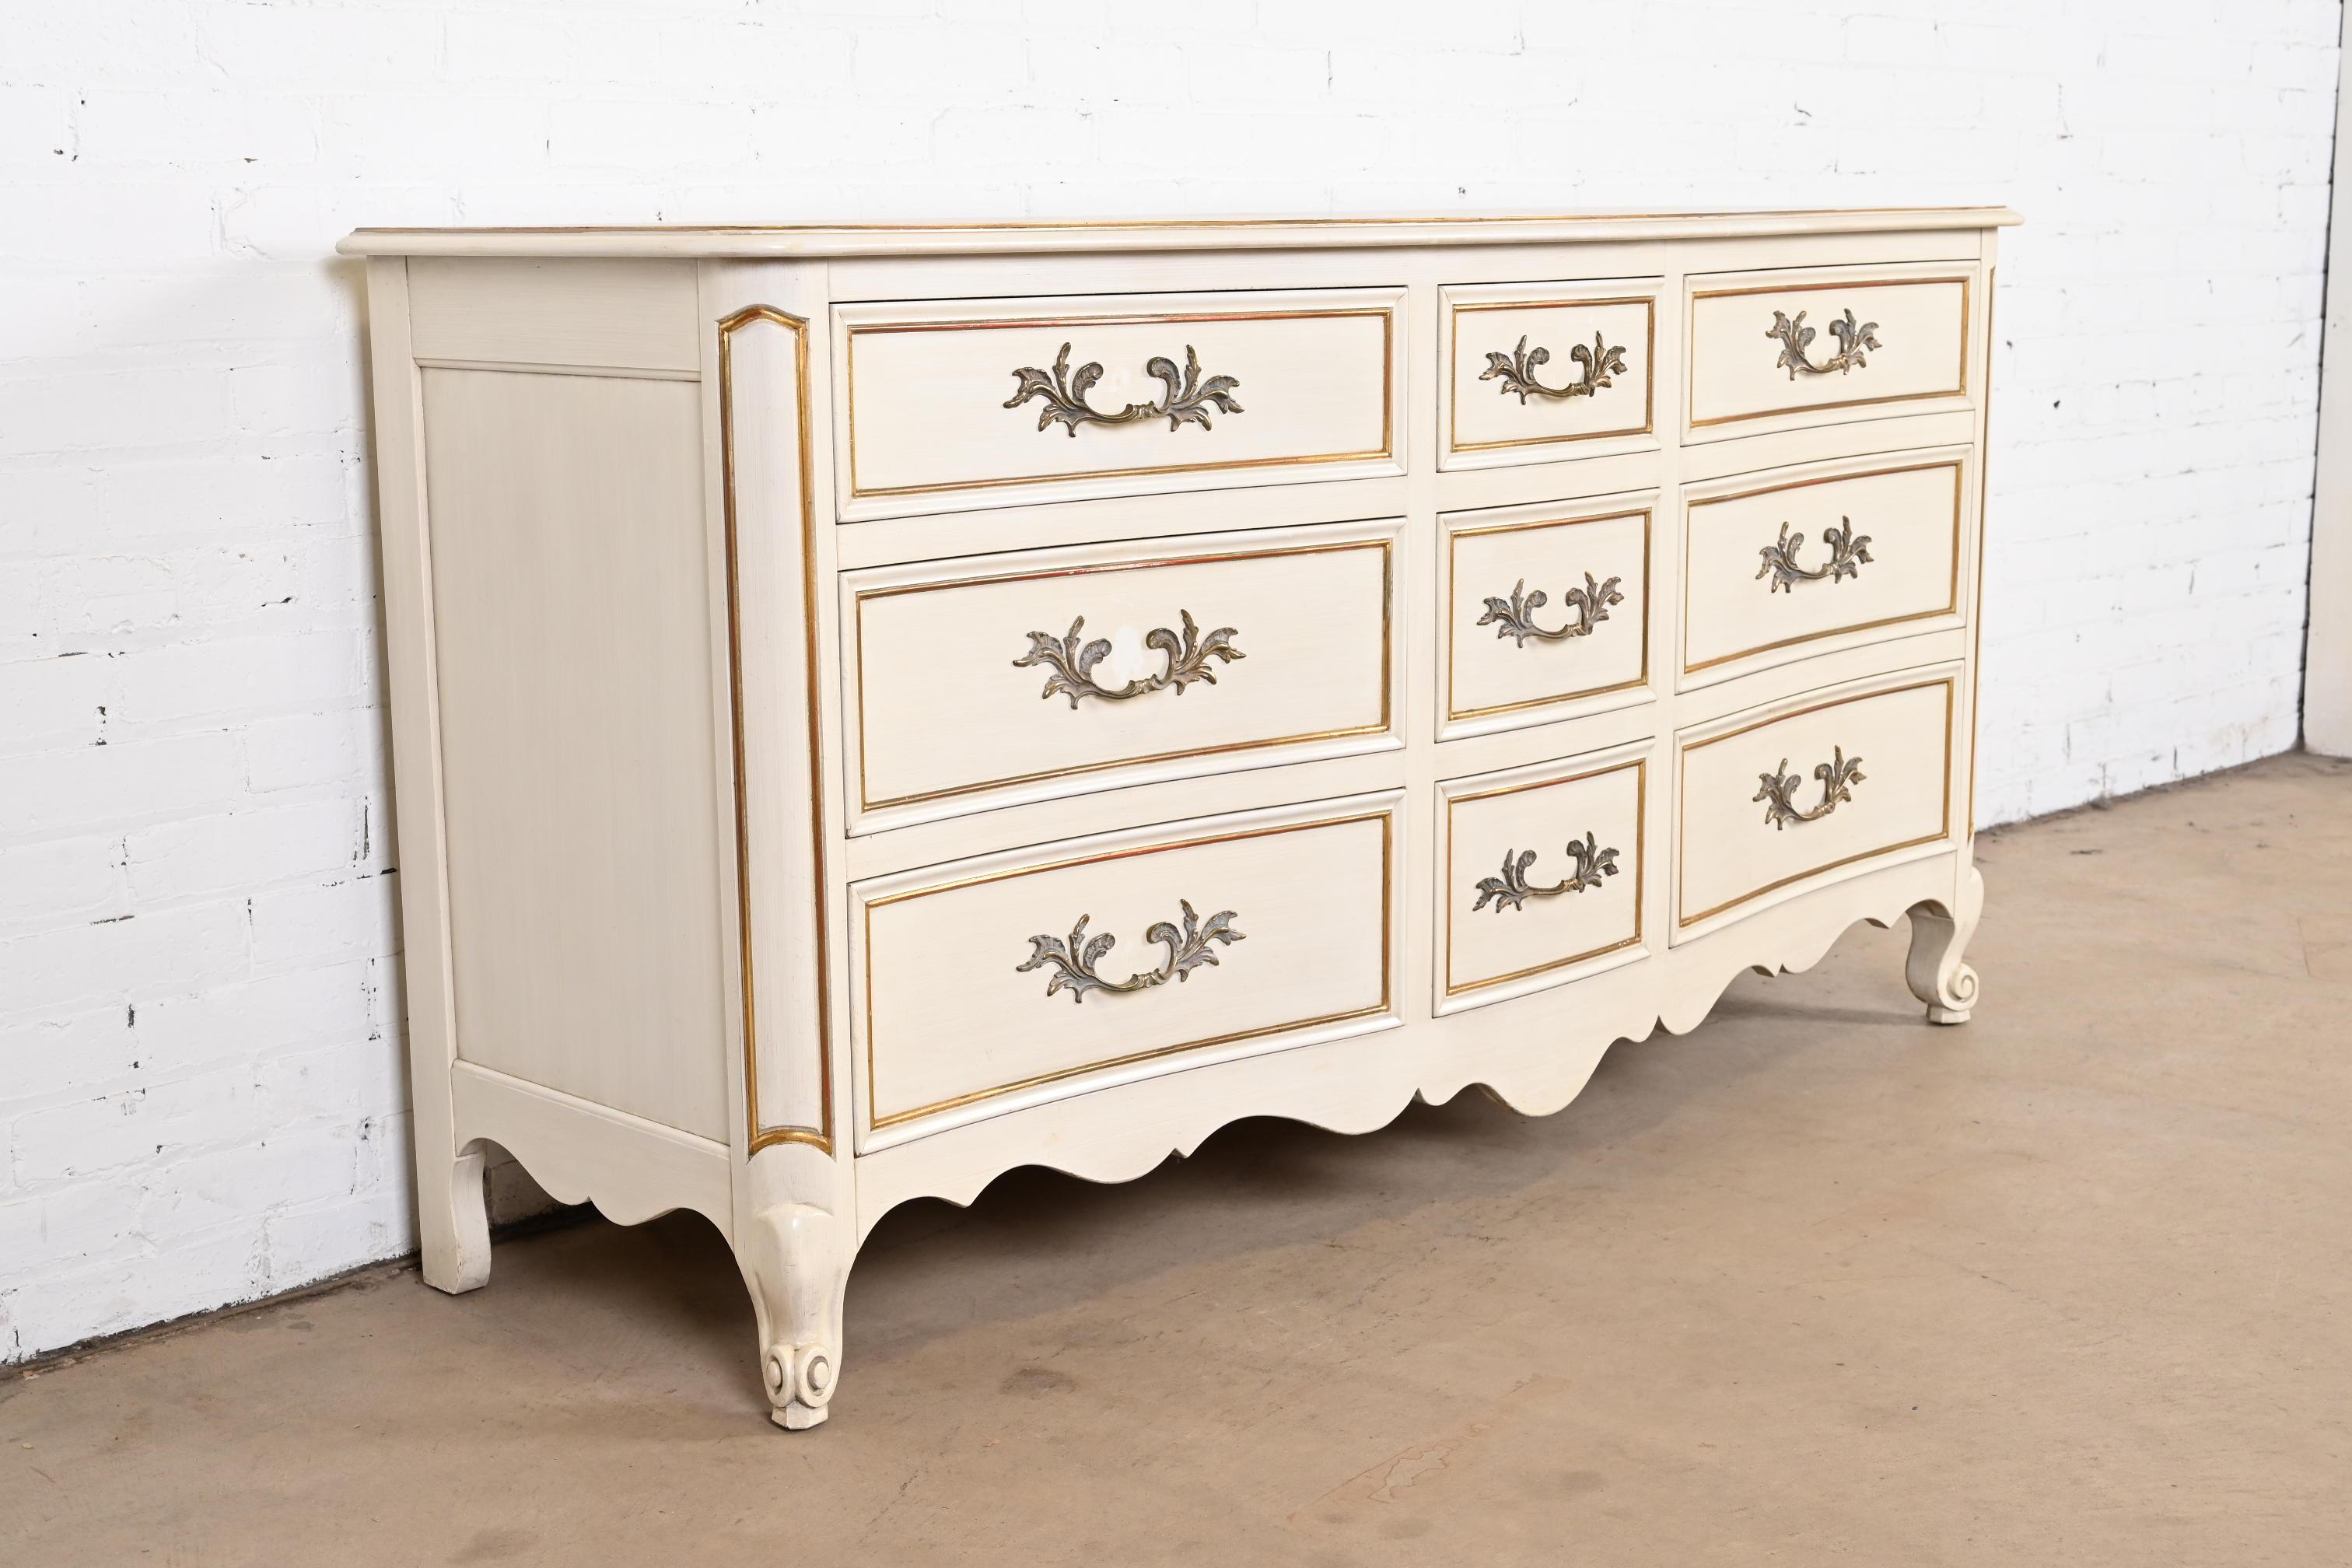 Kindel Furniture French Provincial Louis XV Triple Dresser, circa 1960s In Good Condition For Sale In South Bend, IN